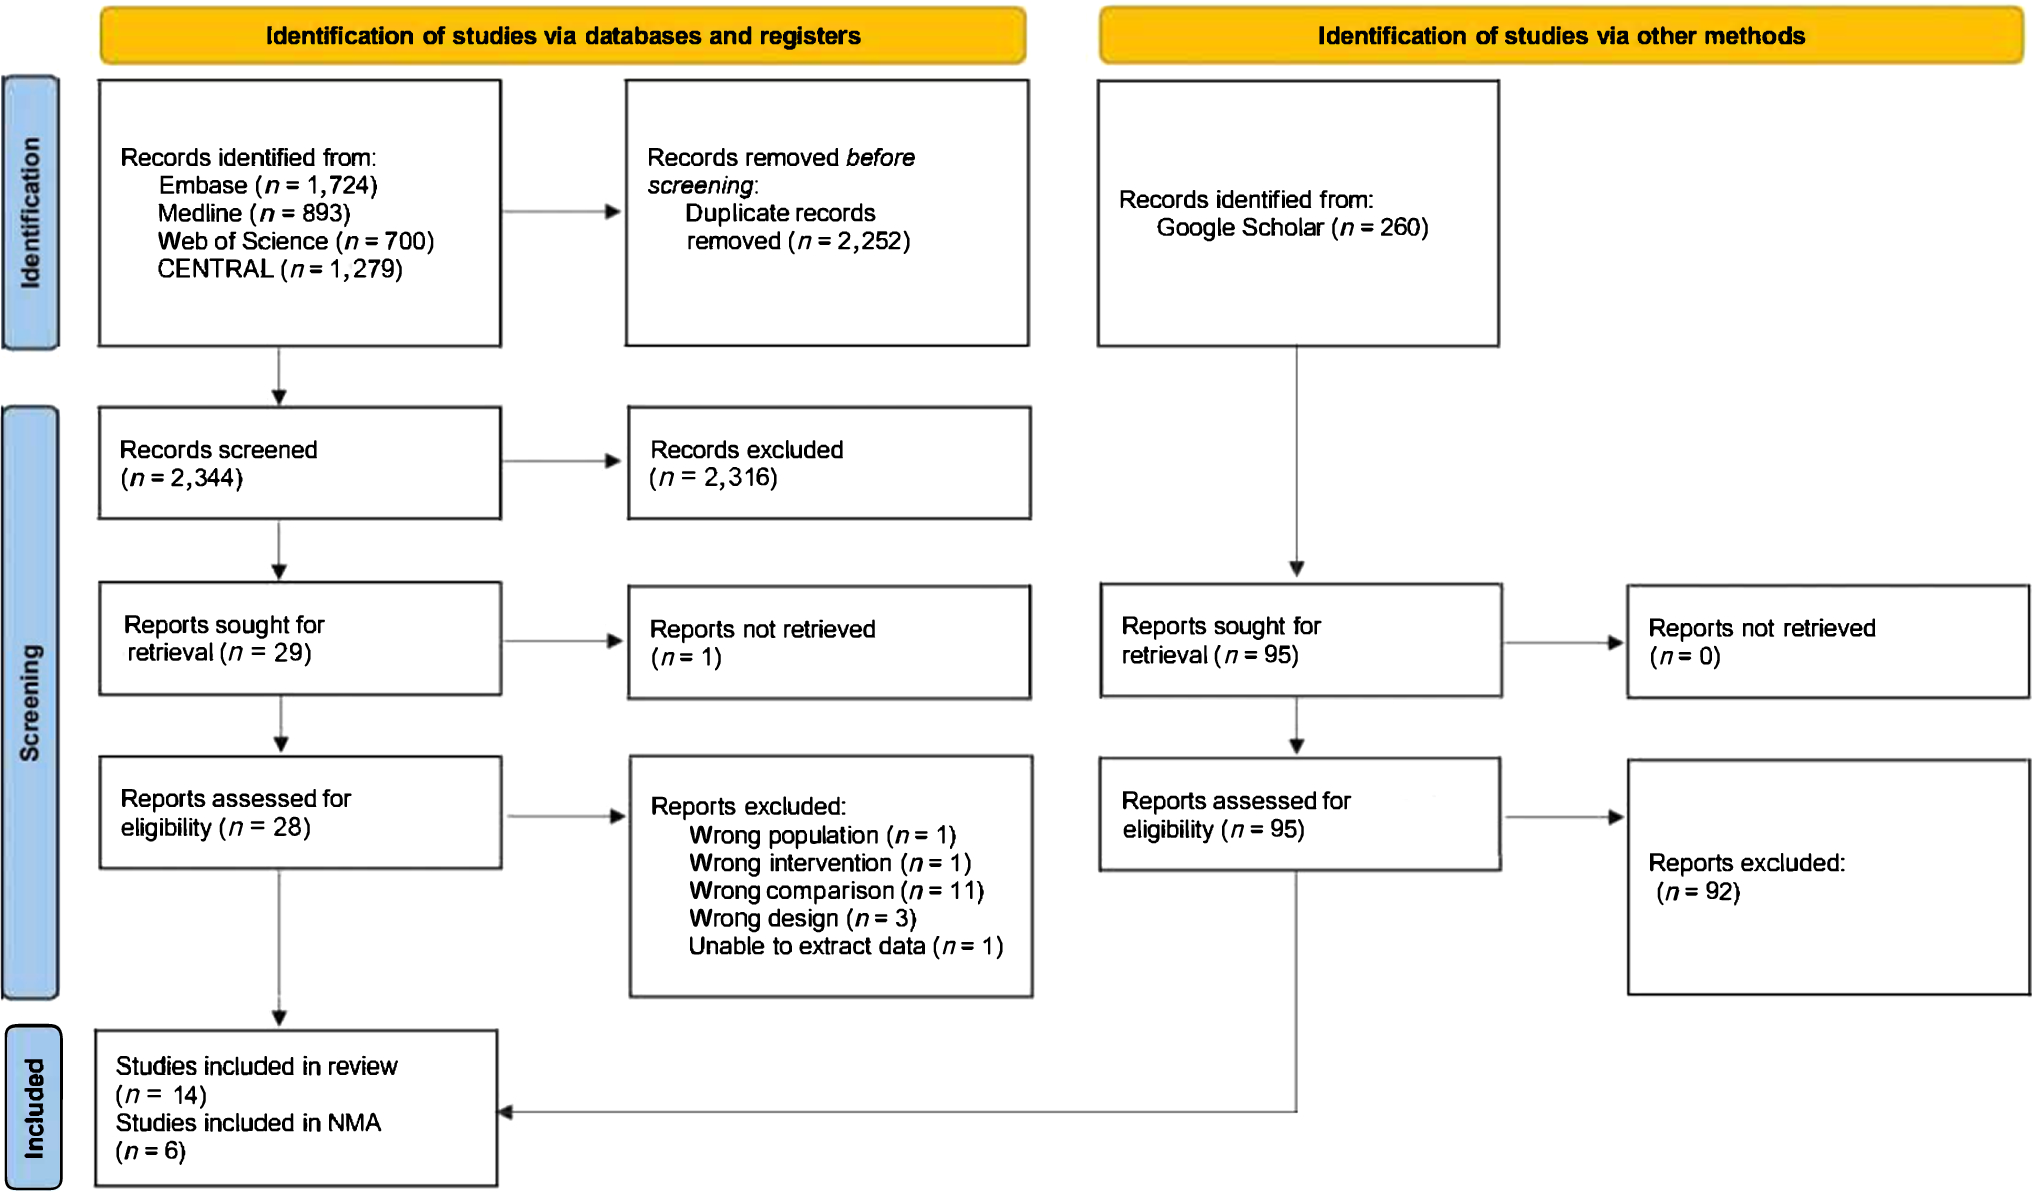 Efficacy of different routes of acetaminophen administration for postoperative pain in children: a systematic review and network meta-analysis